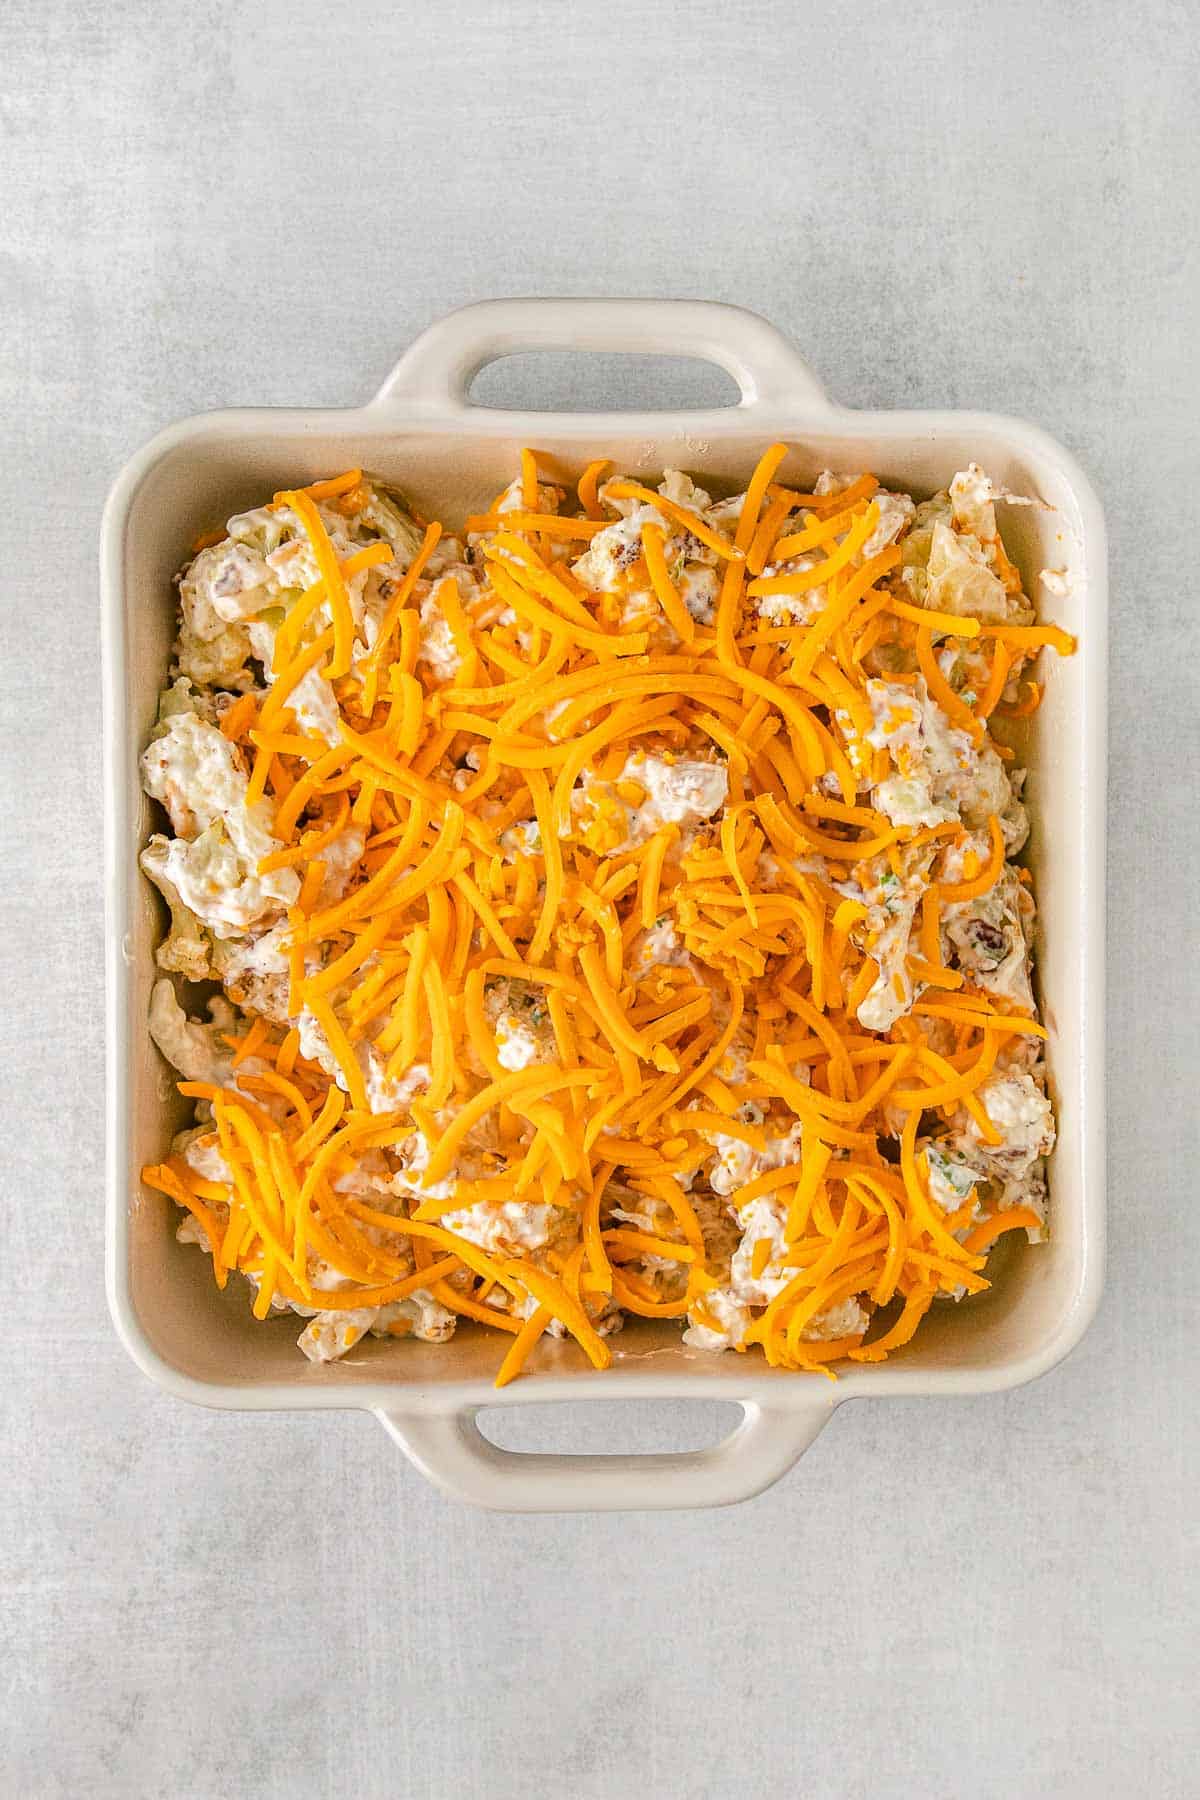 Cauliflower mixture in a baking dish topped with shredded cheddar cheese.